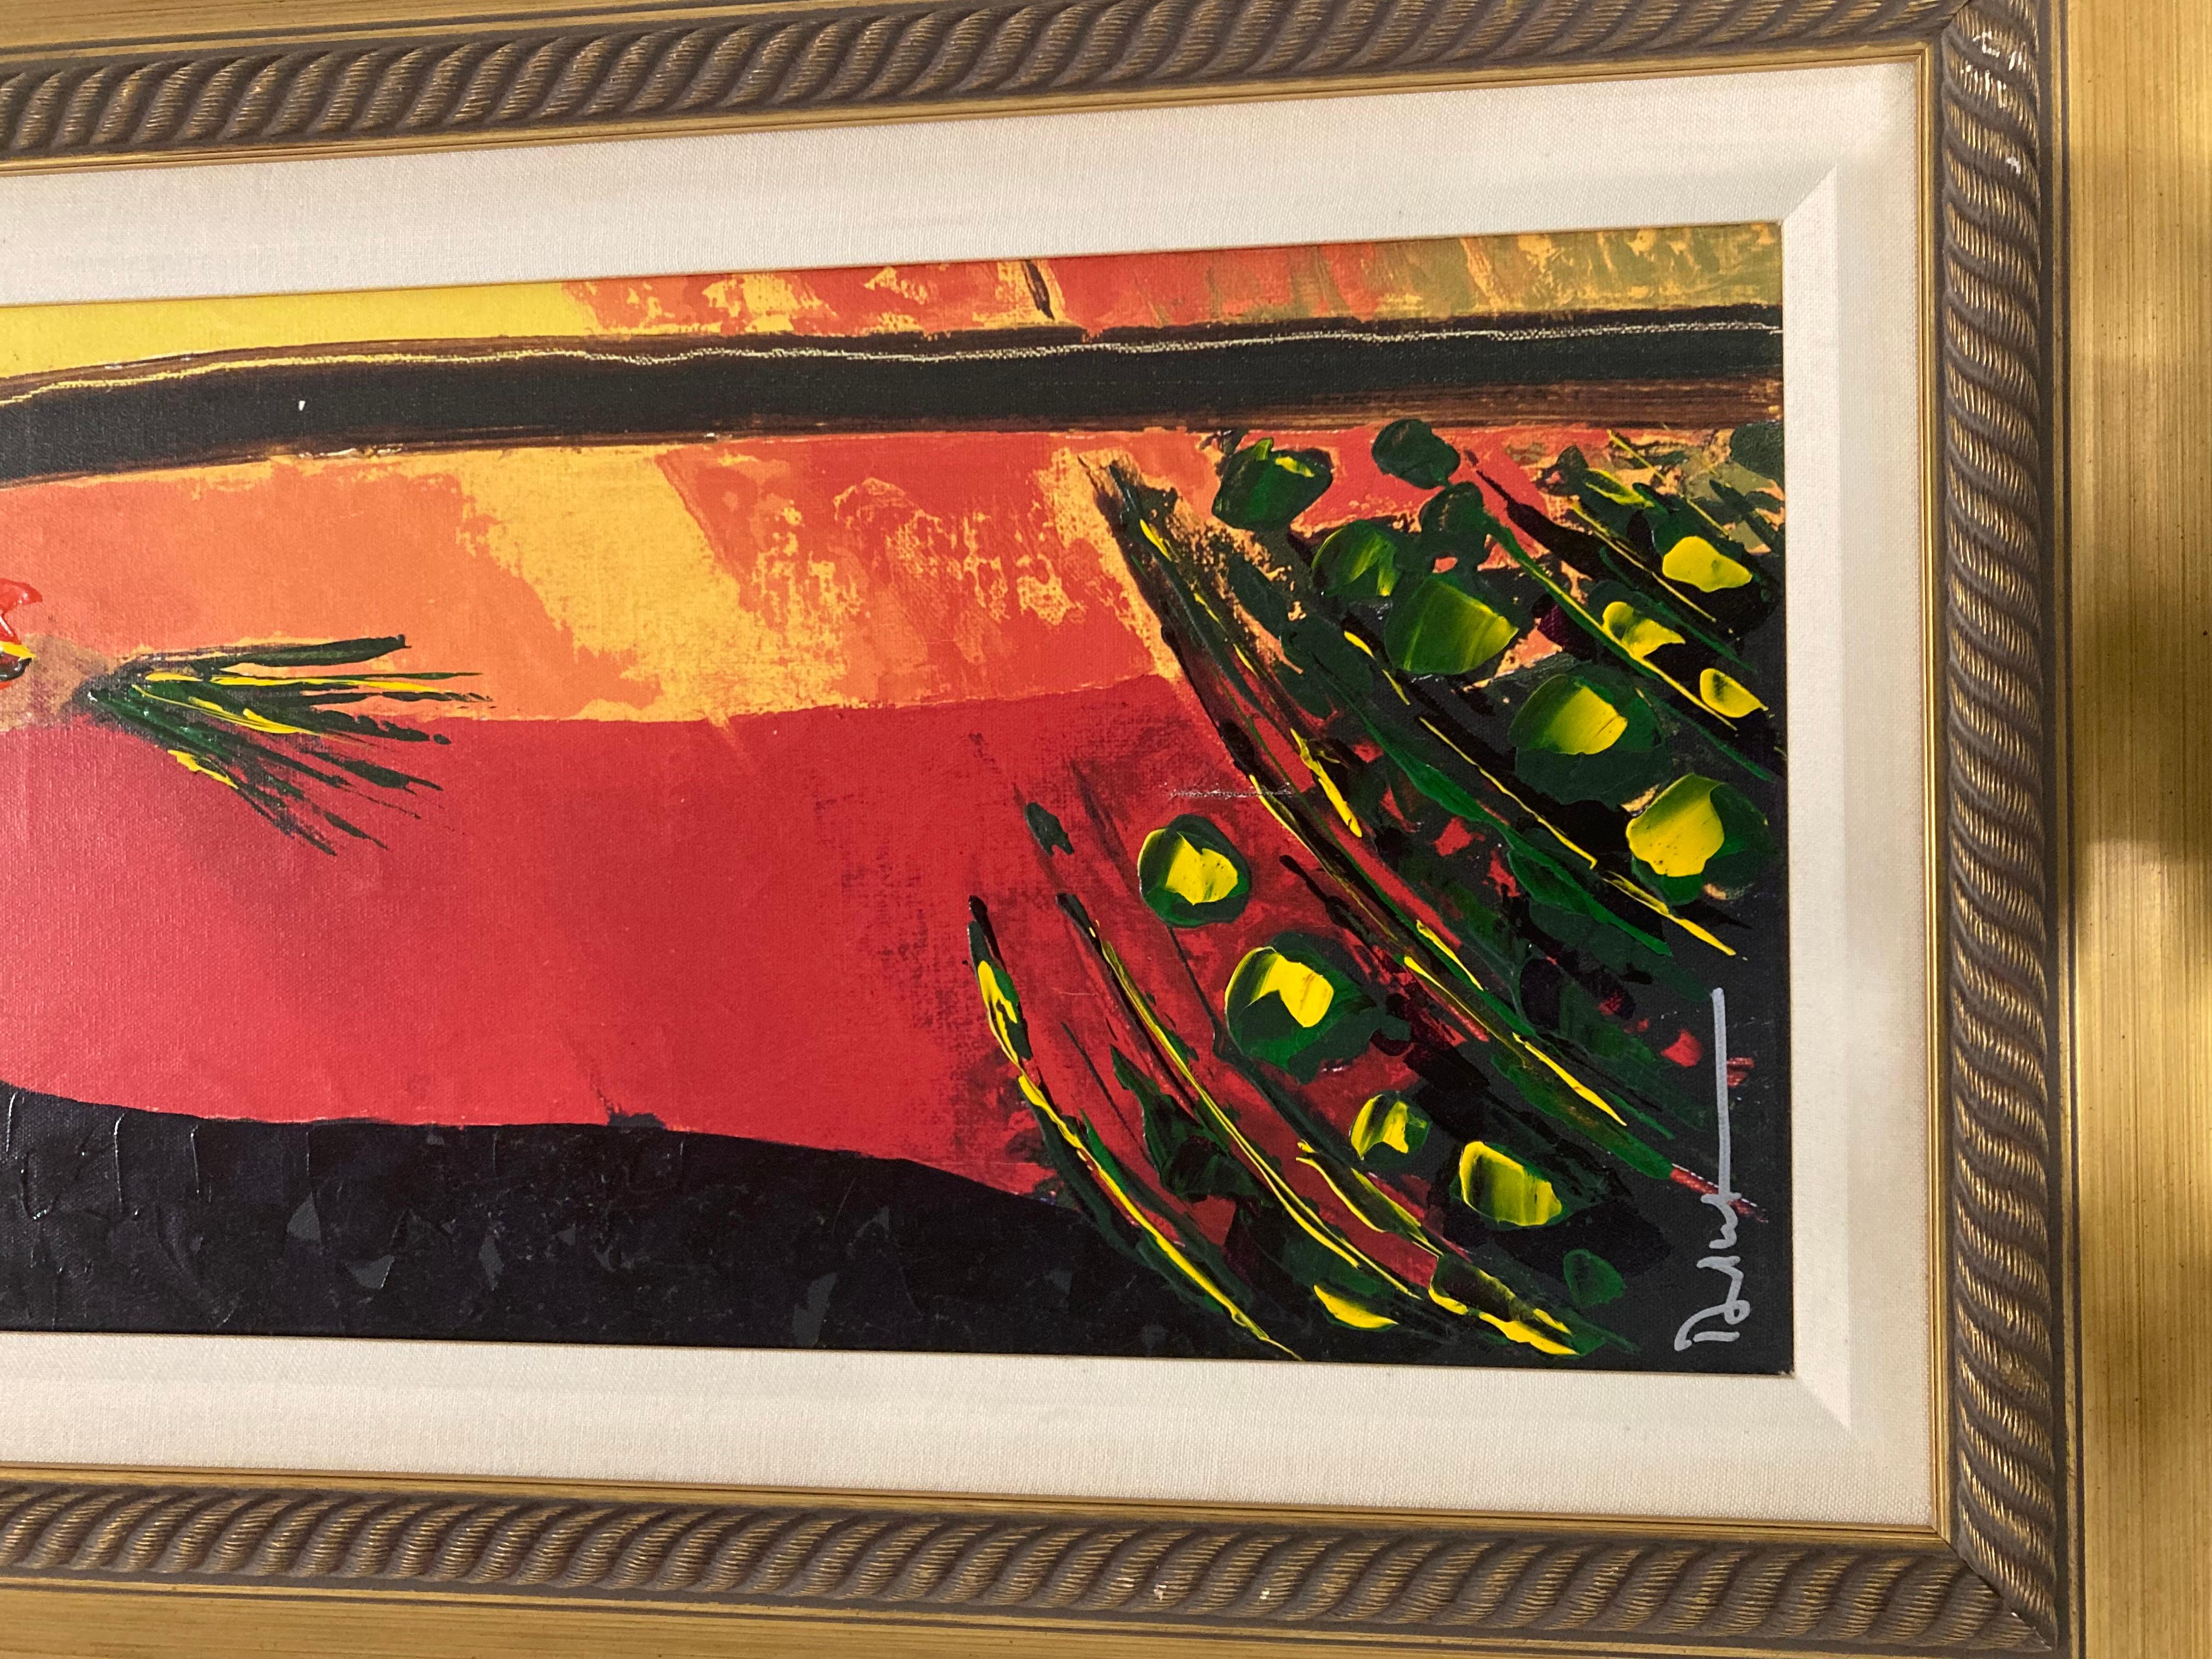 This is an Emile Bellet Giclee on canvas embellished “serenite orange”. In good condition measures 45x21. 